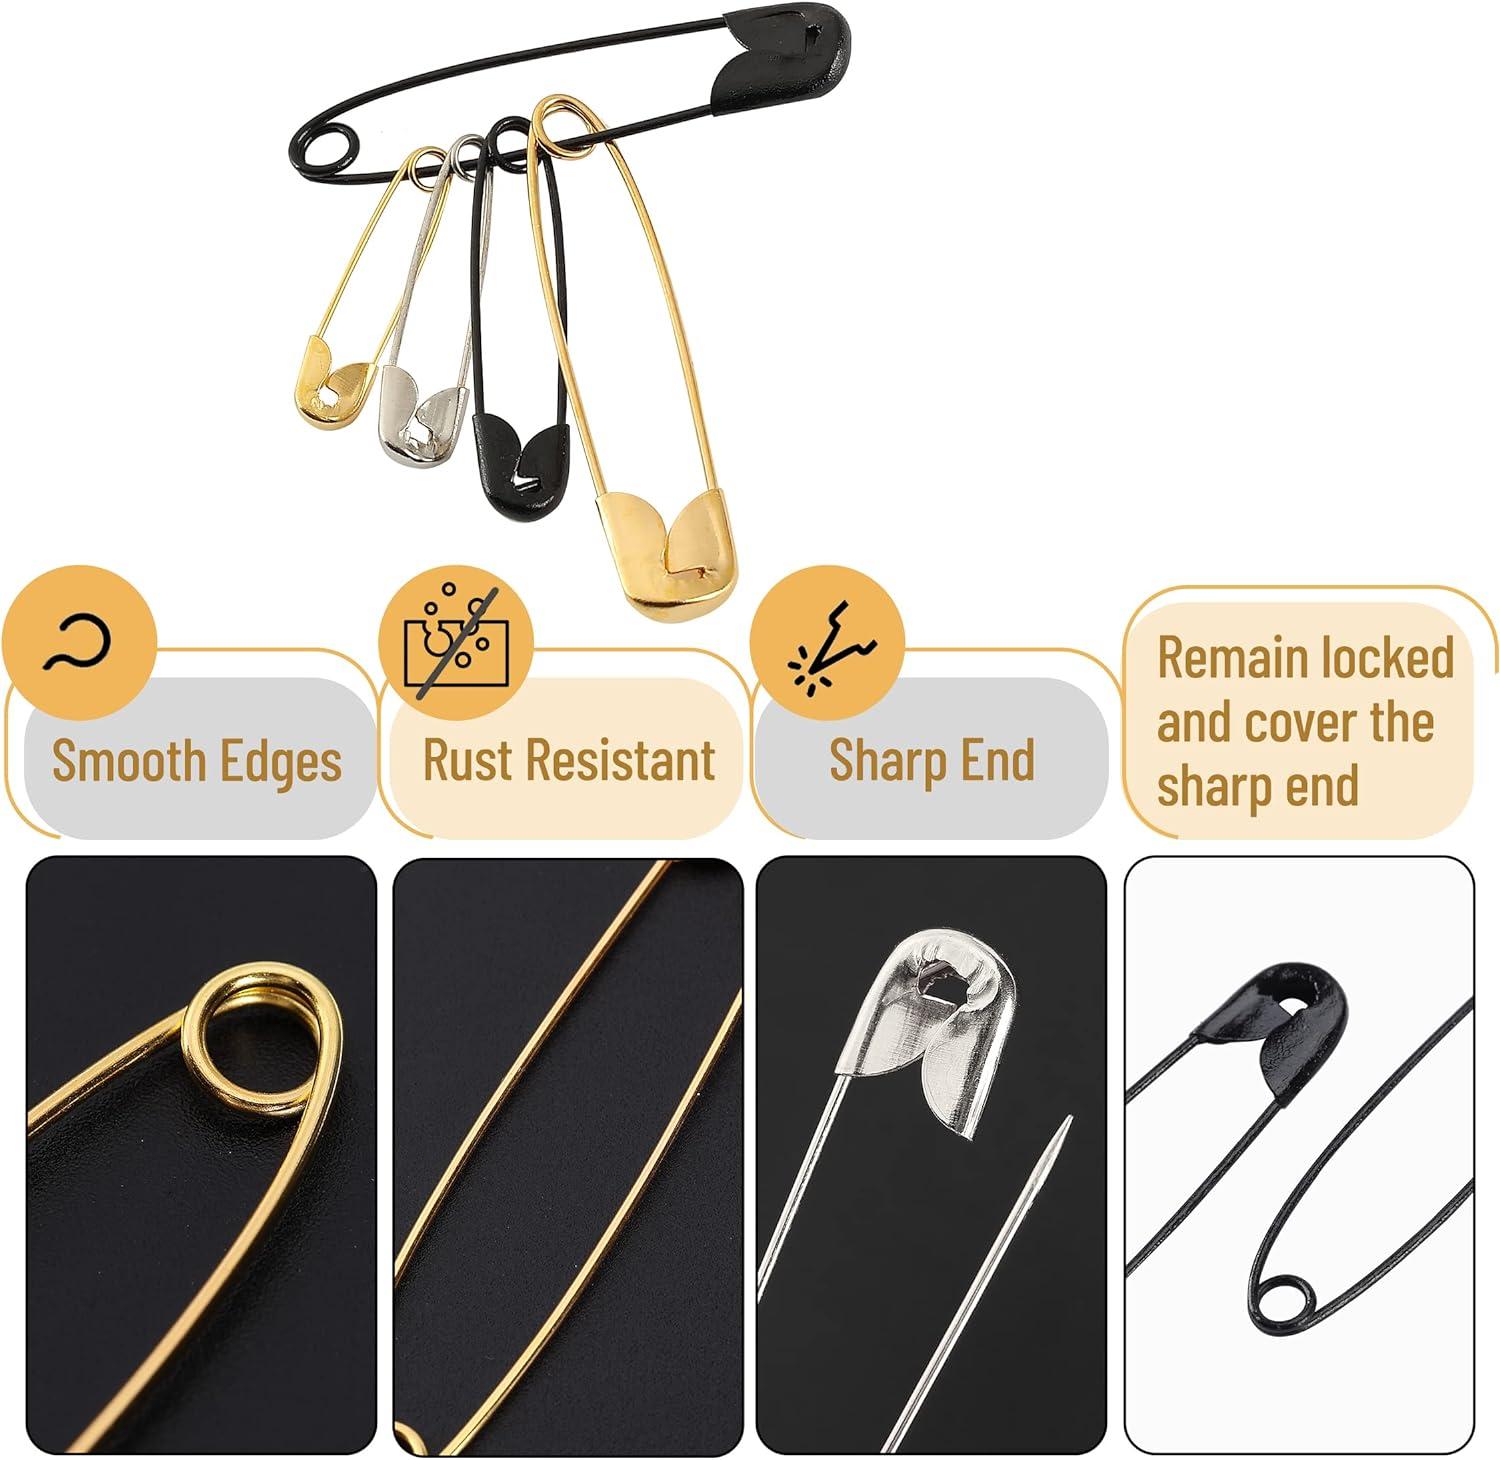 Mr. Pen- Safety Pins, Safety Pins Assorted, 400 Pack, Black, Assorted Safety  Pins, Safety Pin, Small Safety Pins 